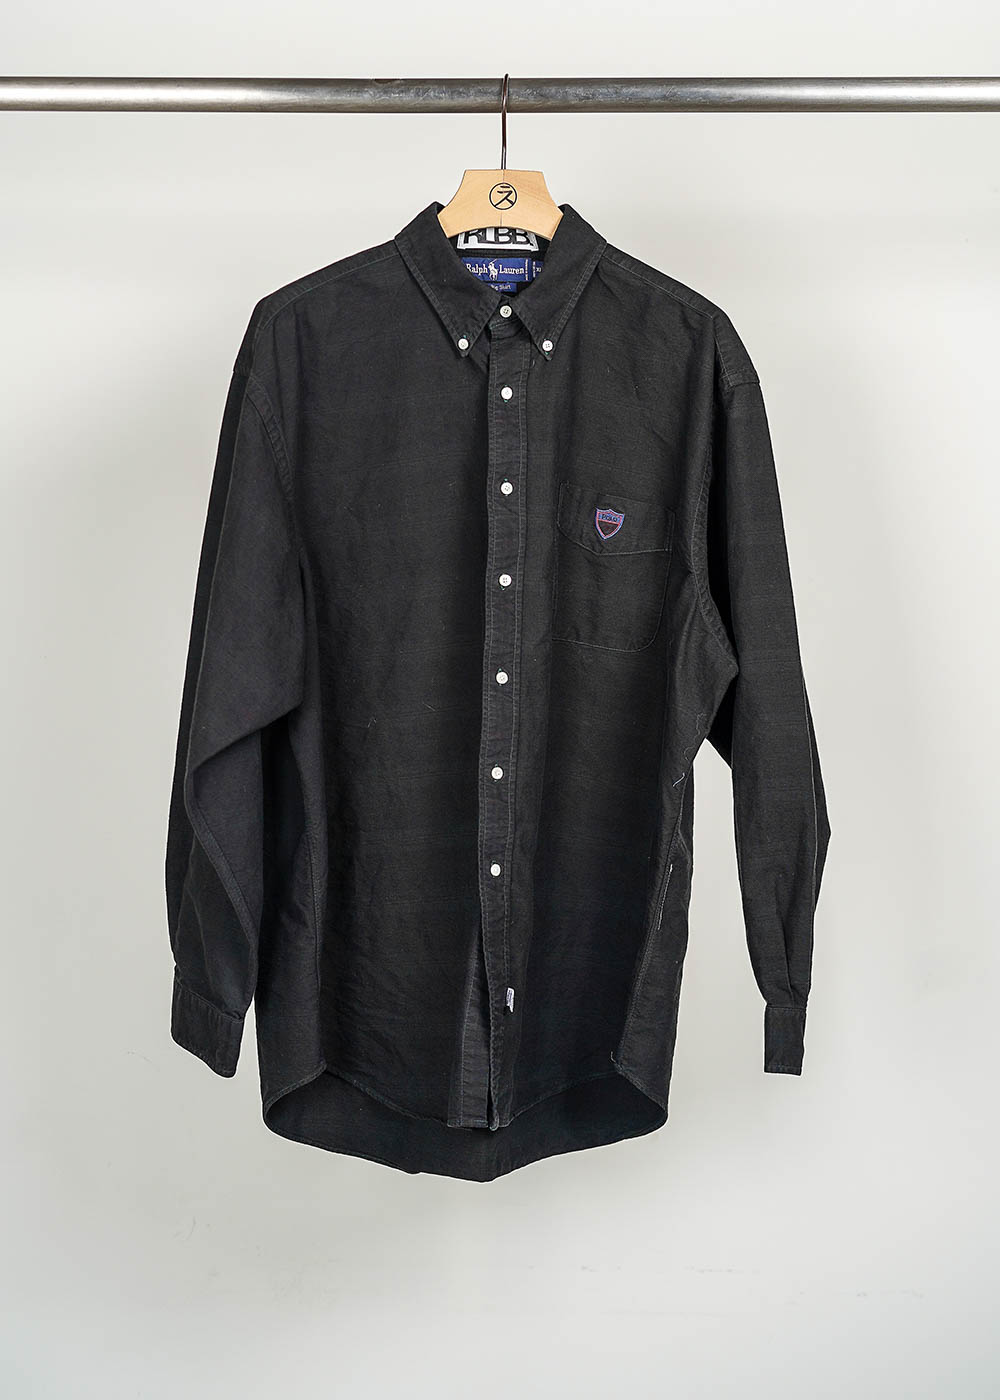 reproduction 163 / PRL Big Shirts (Overdyed)